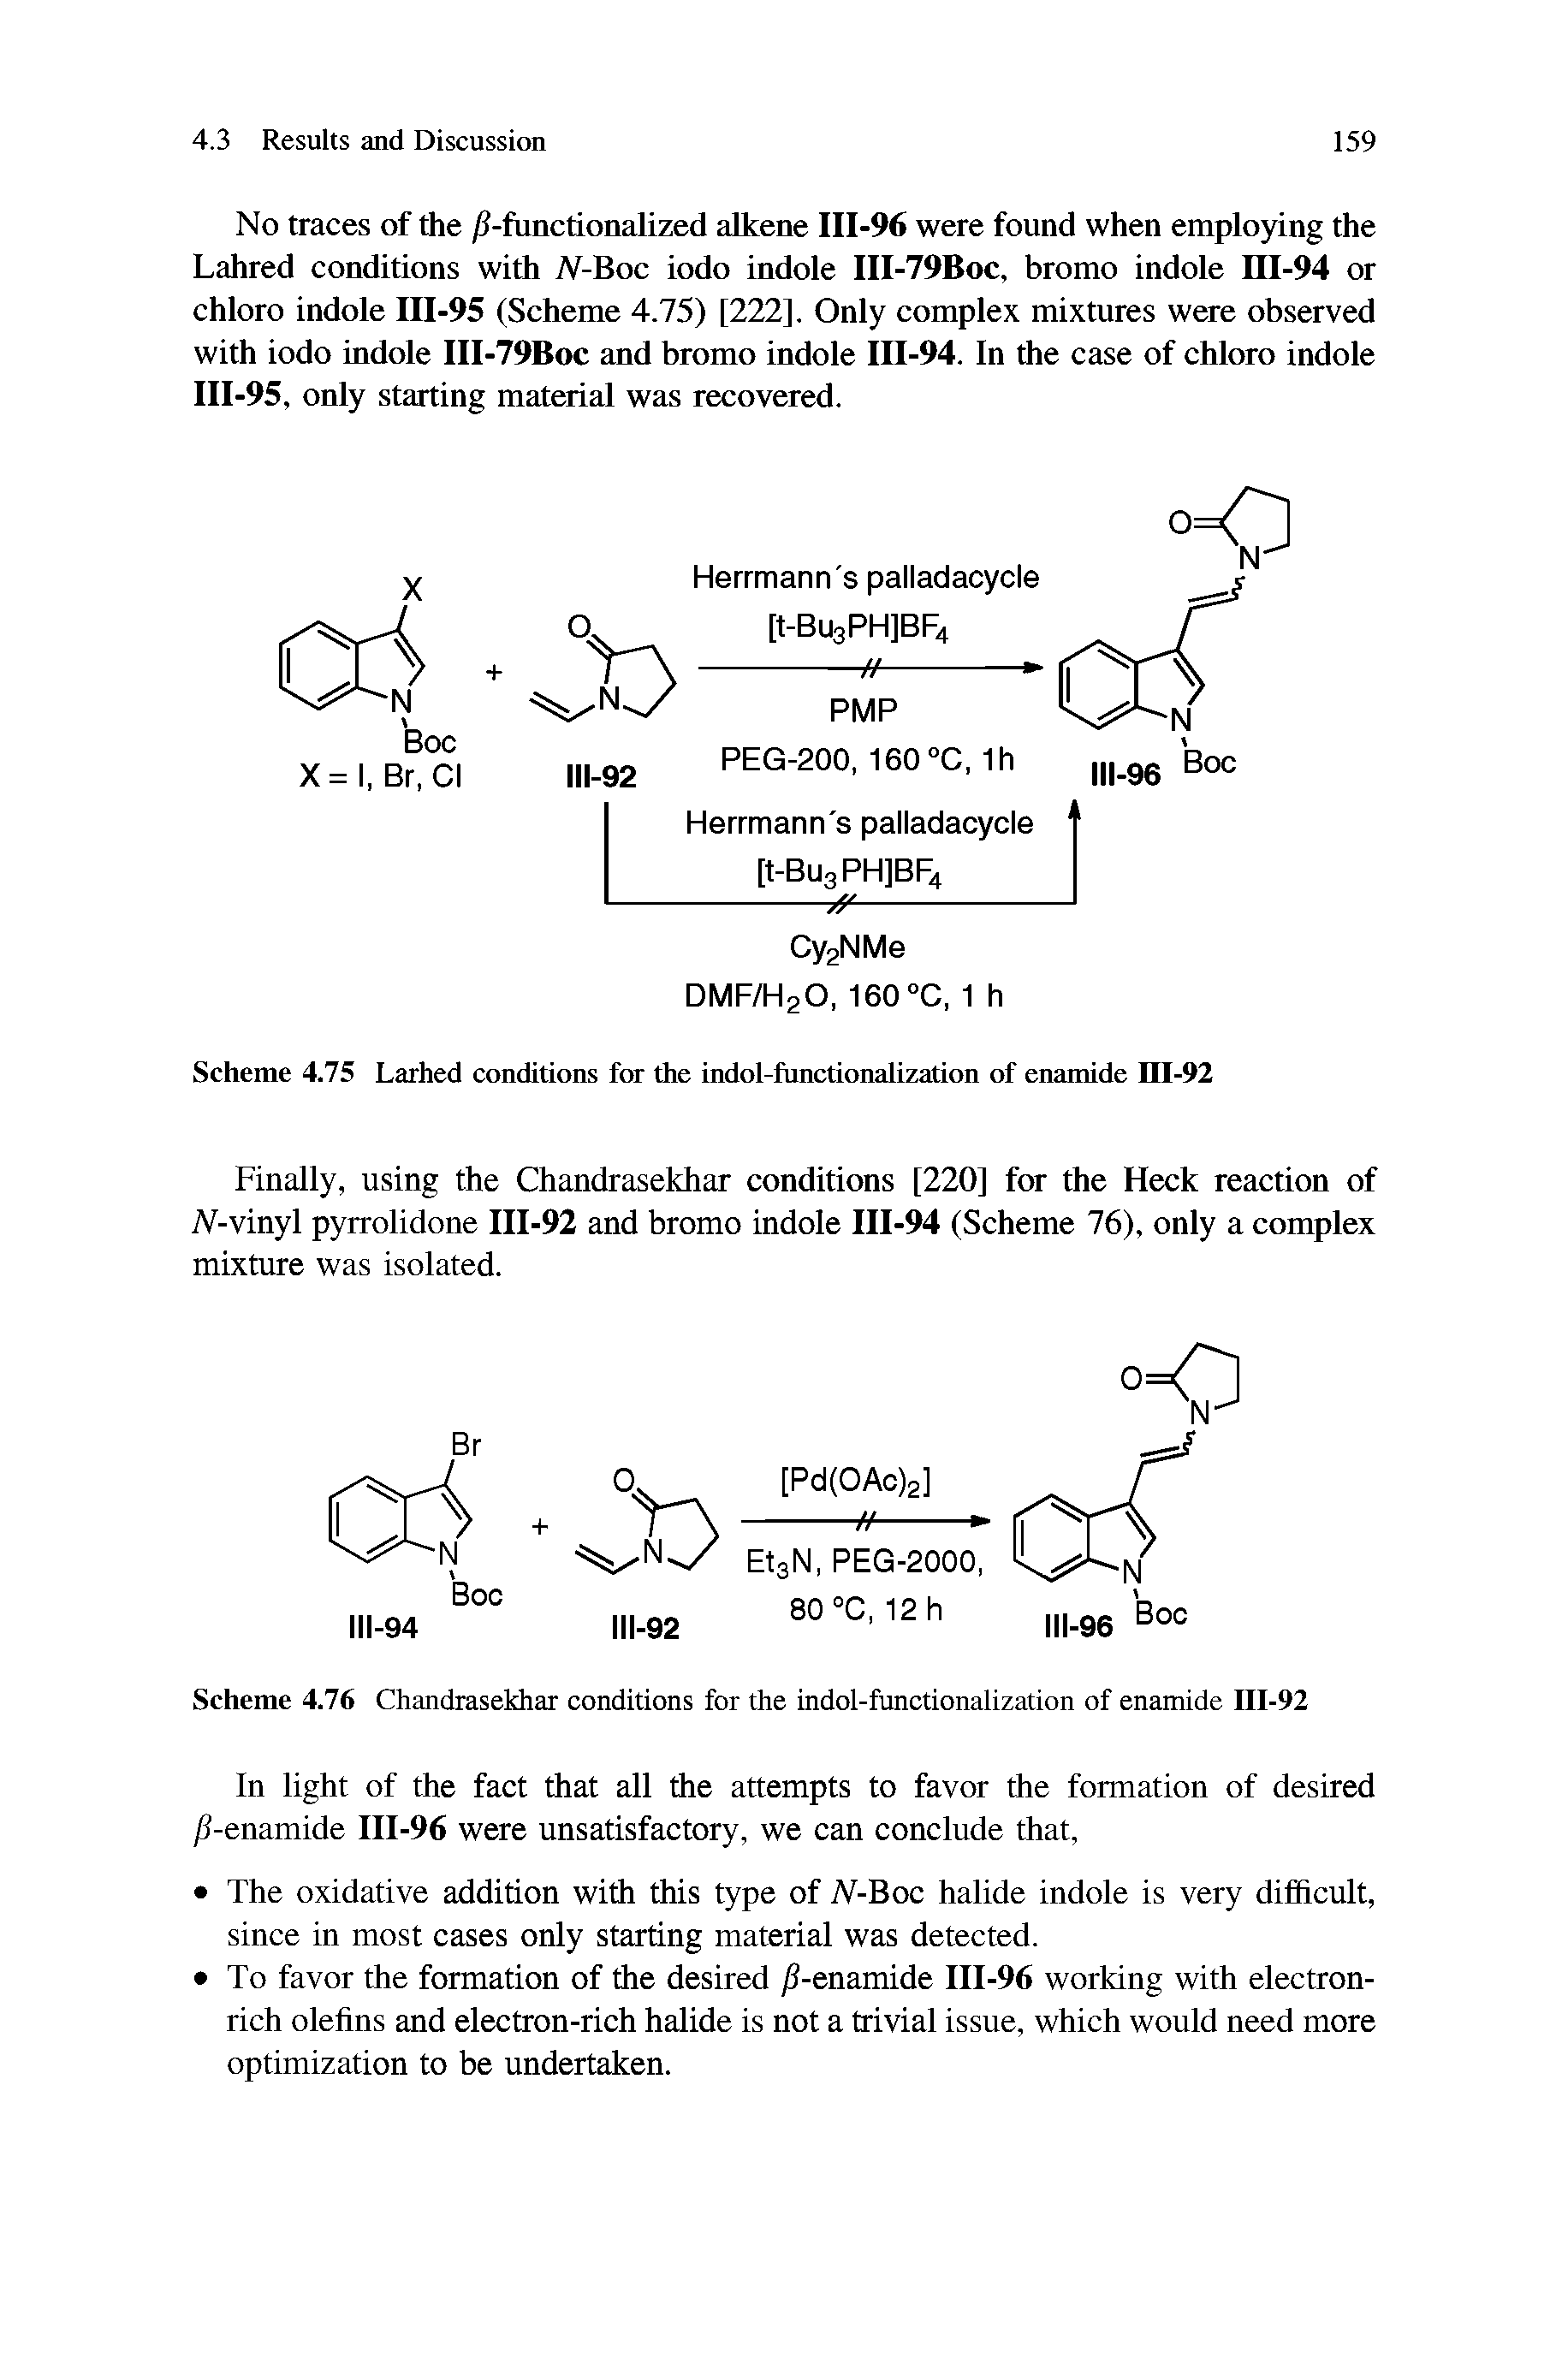 Scheme 4.75 Larhed conditions fen the indol-functionalization of enamide ni-92...